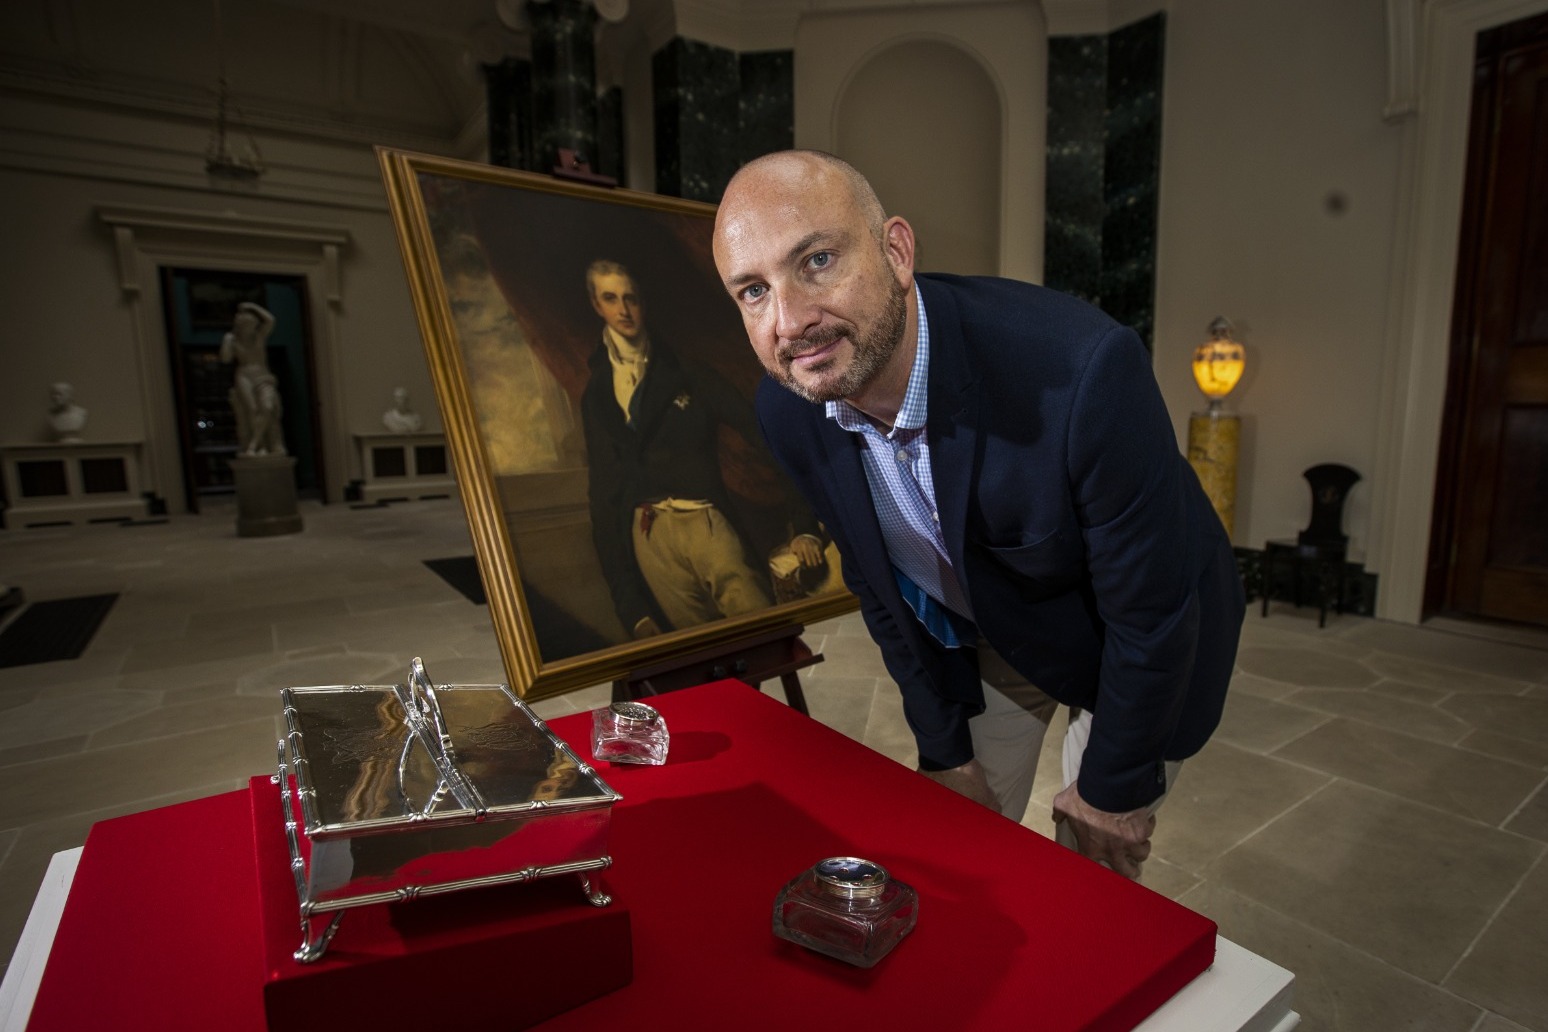 Antique inkstand which witnessed seminal European events goes on display 